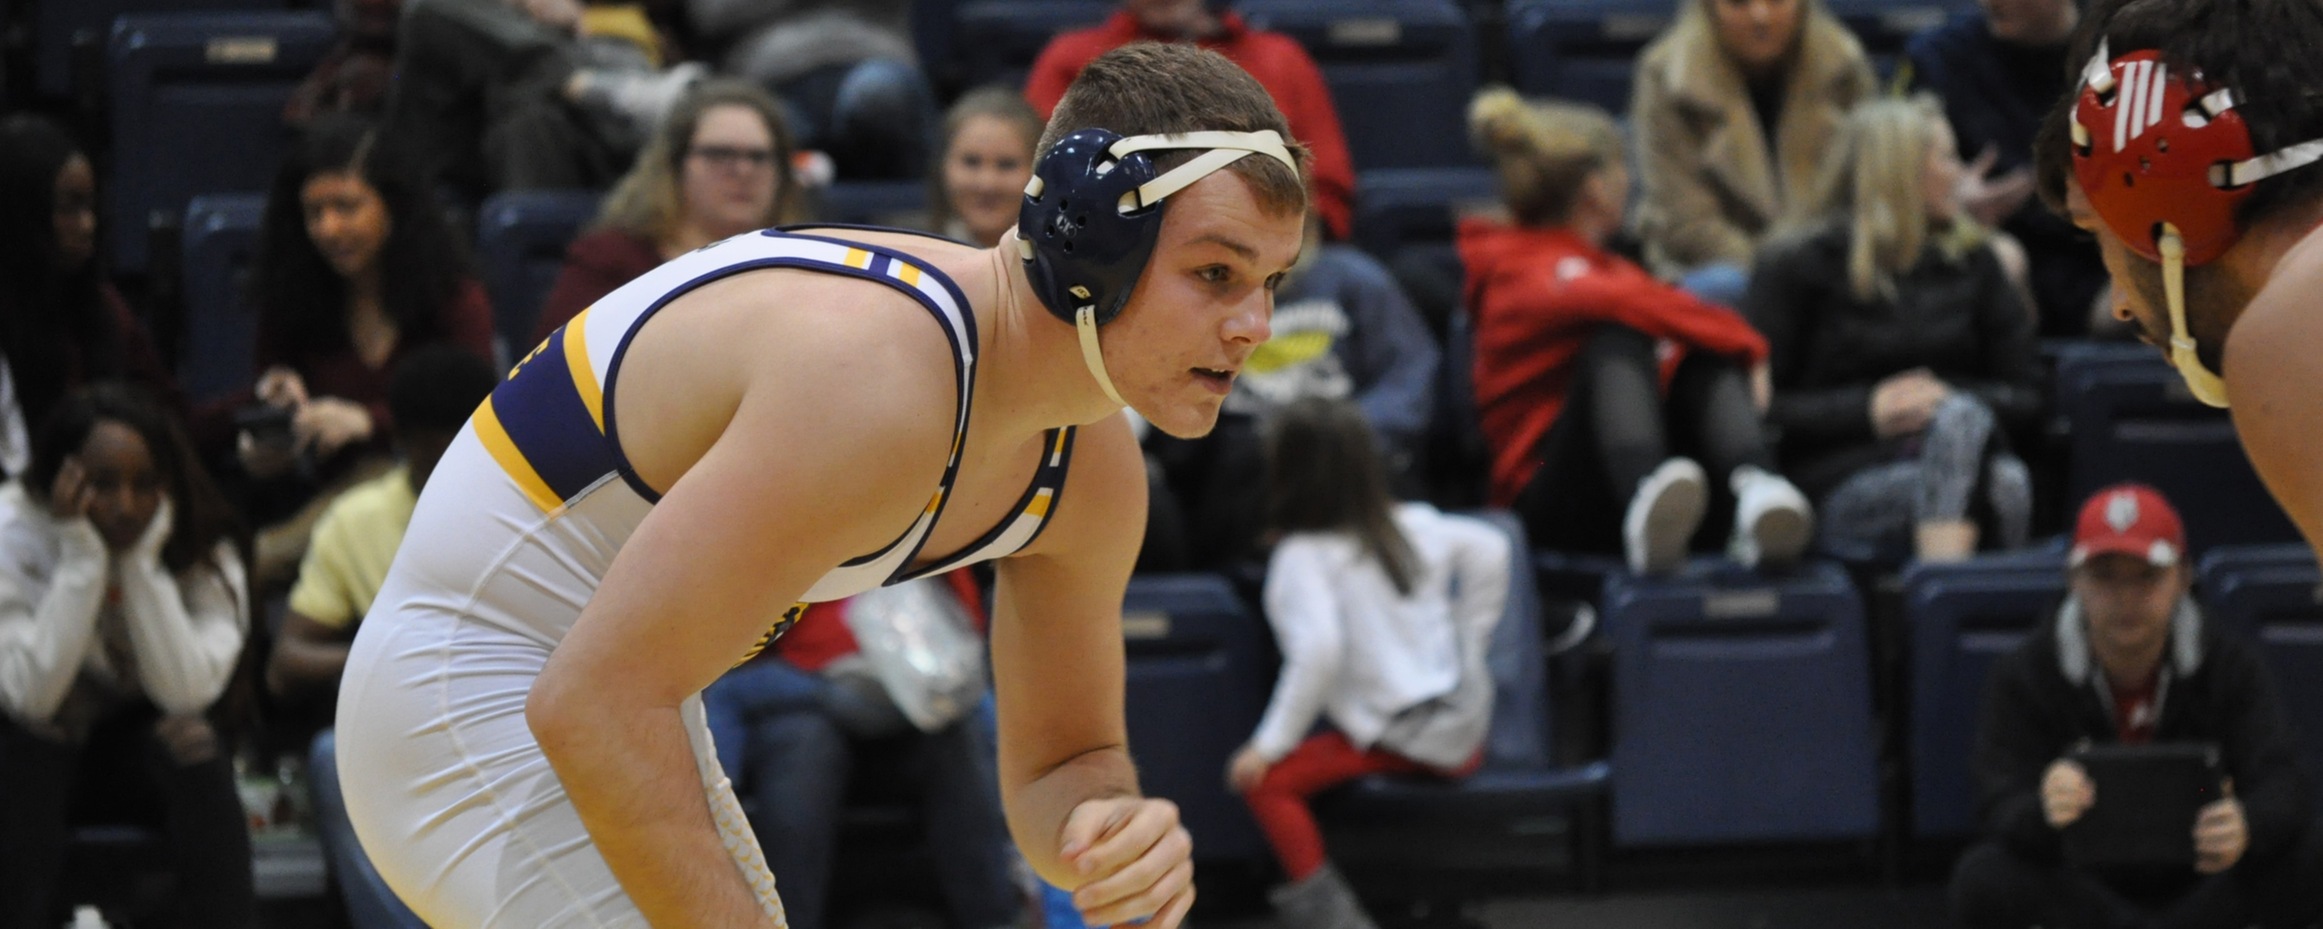 Five Cobras Place Individually at the 39th Annual Pembroke Classic